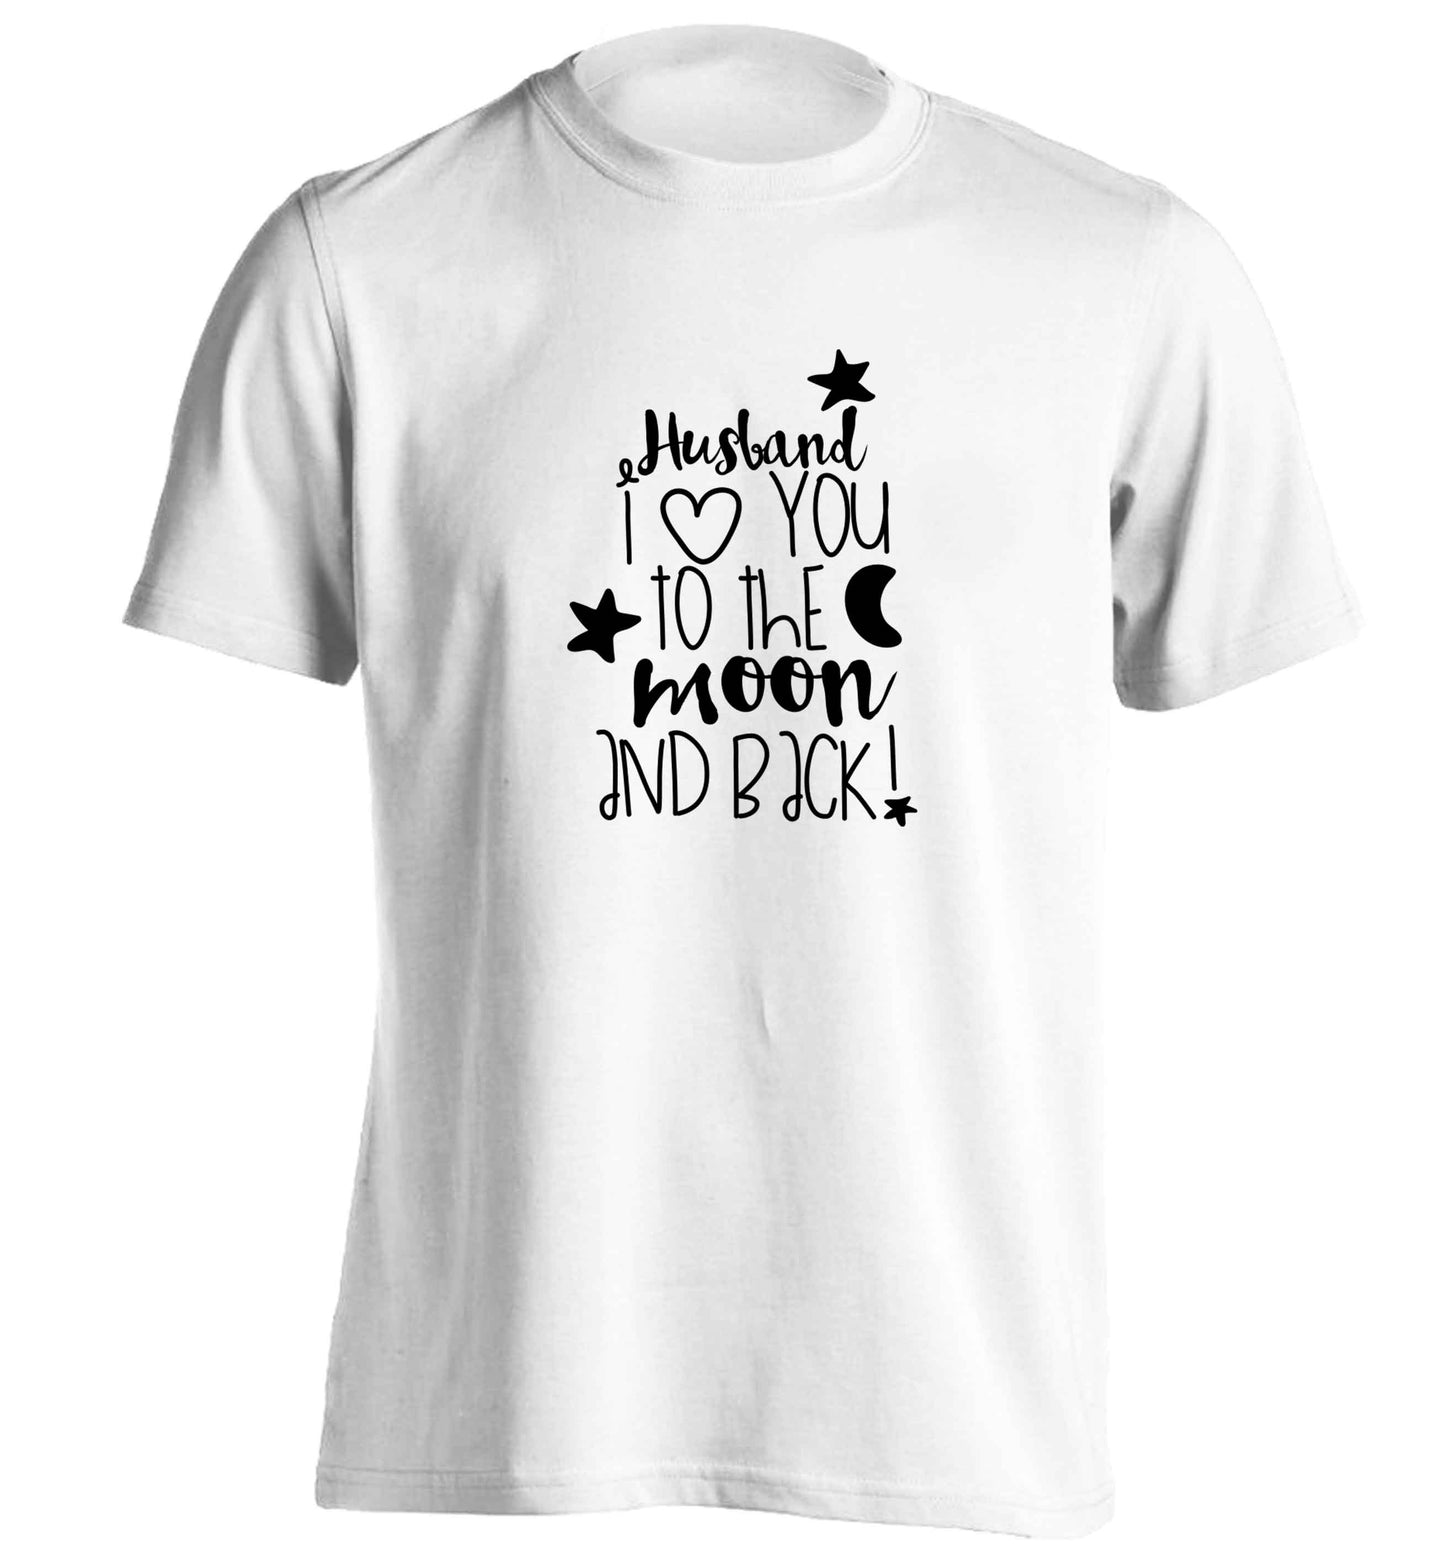 Husband I love you to the moon and back adults unisex white Tshirt 2XL